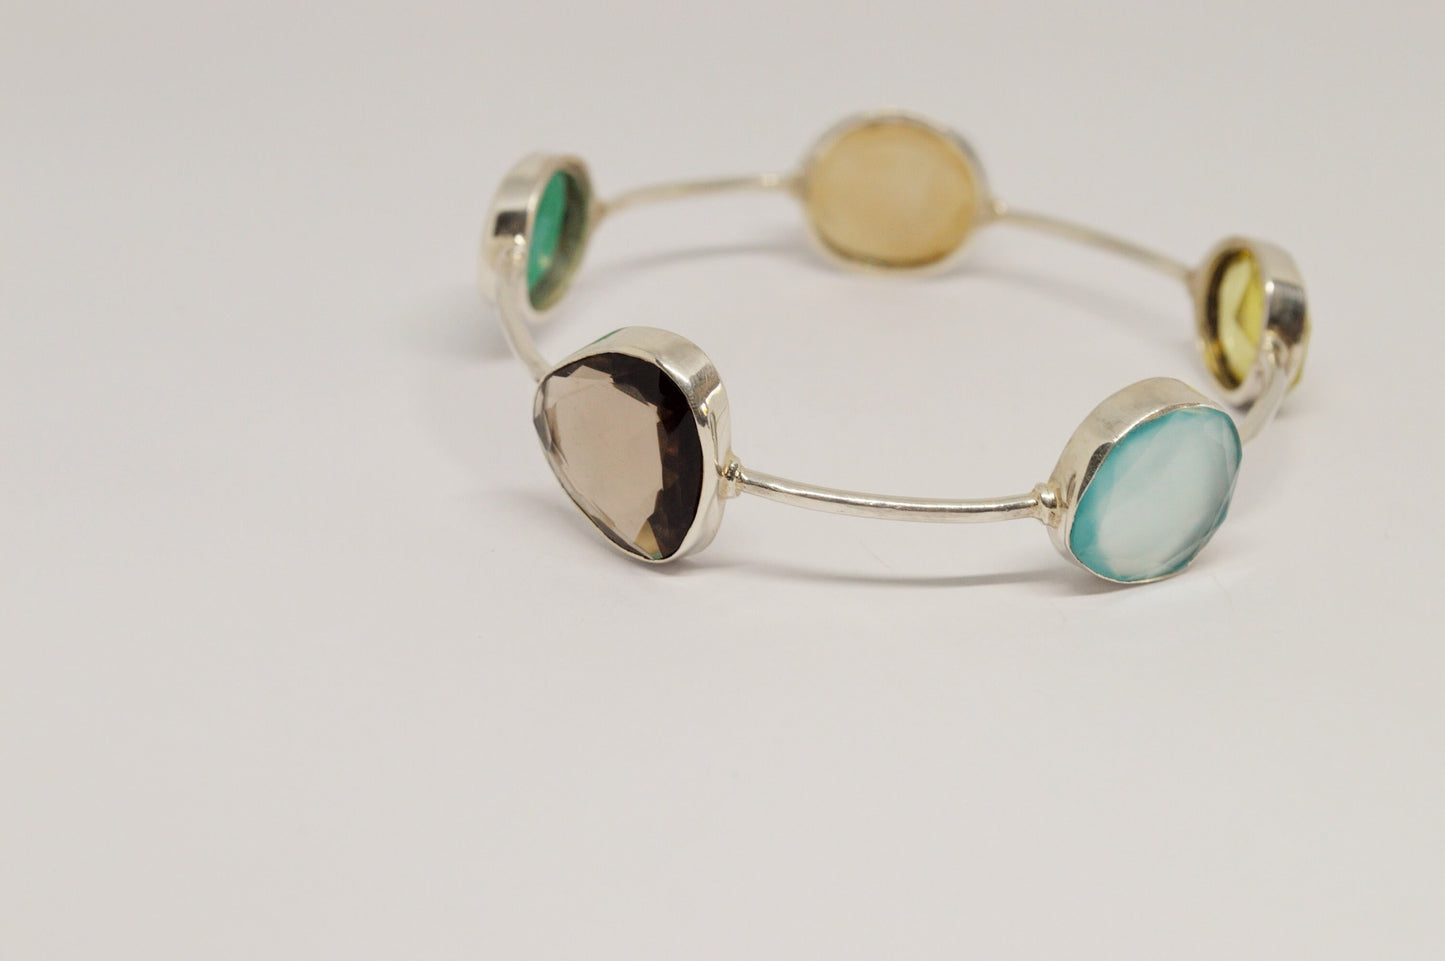 Multi Coloured Stone Silver Bangle Bracelet For a Small Wrist, Sterling Silver Gemstone Bracelets For Women, birthstone bangles, gifts